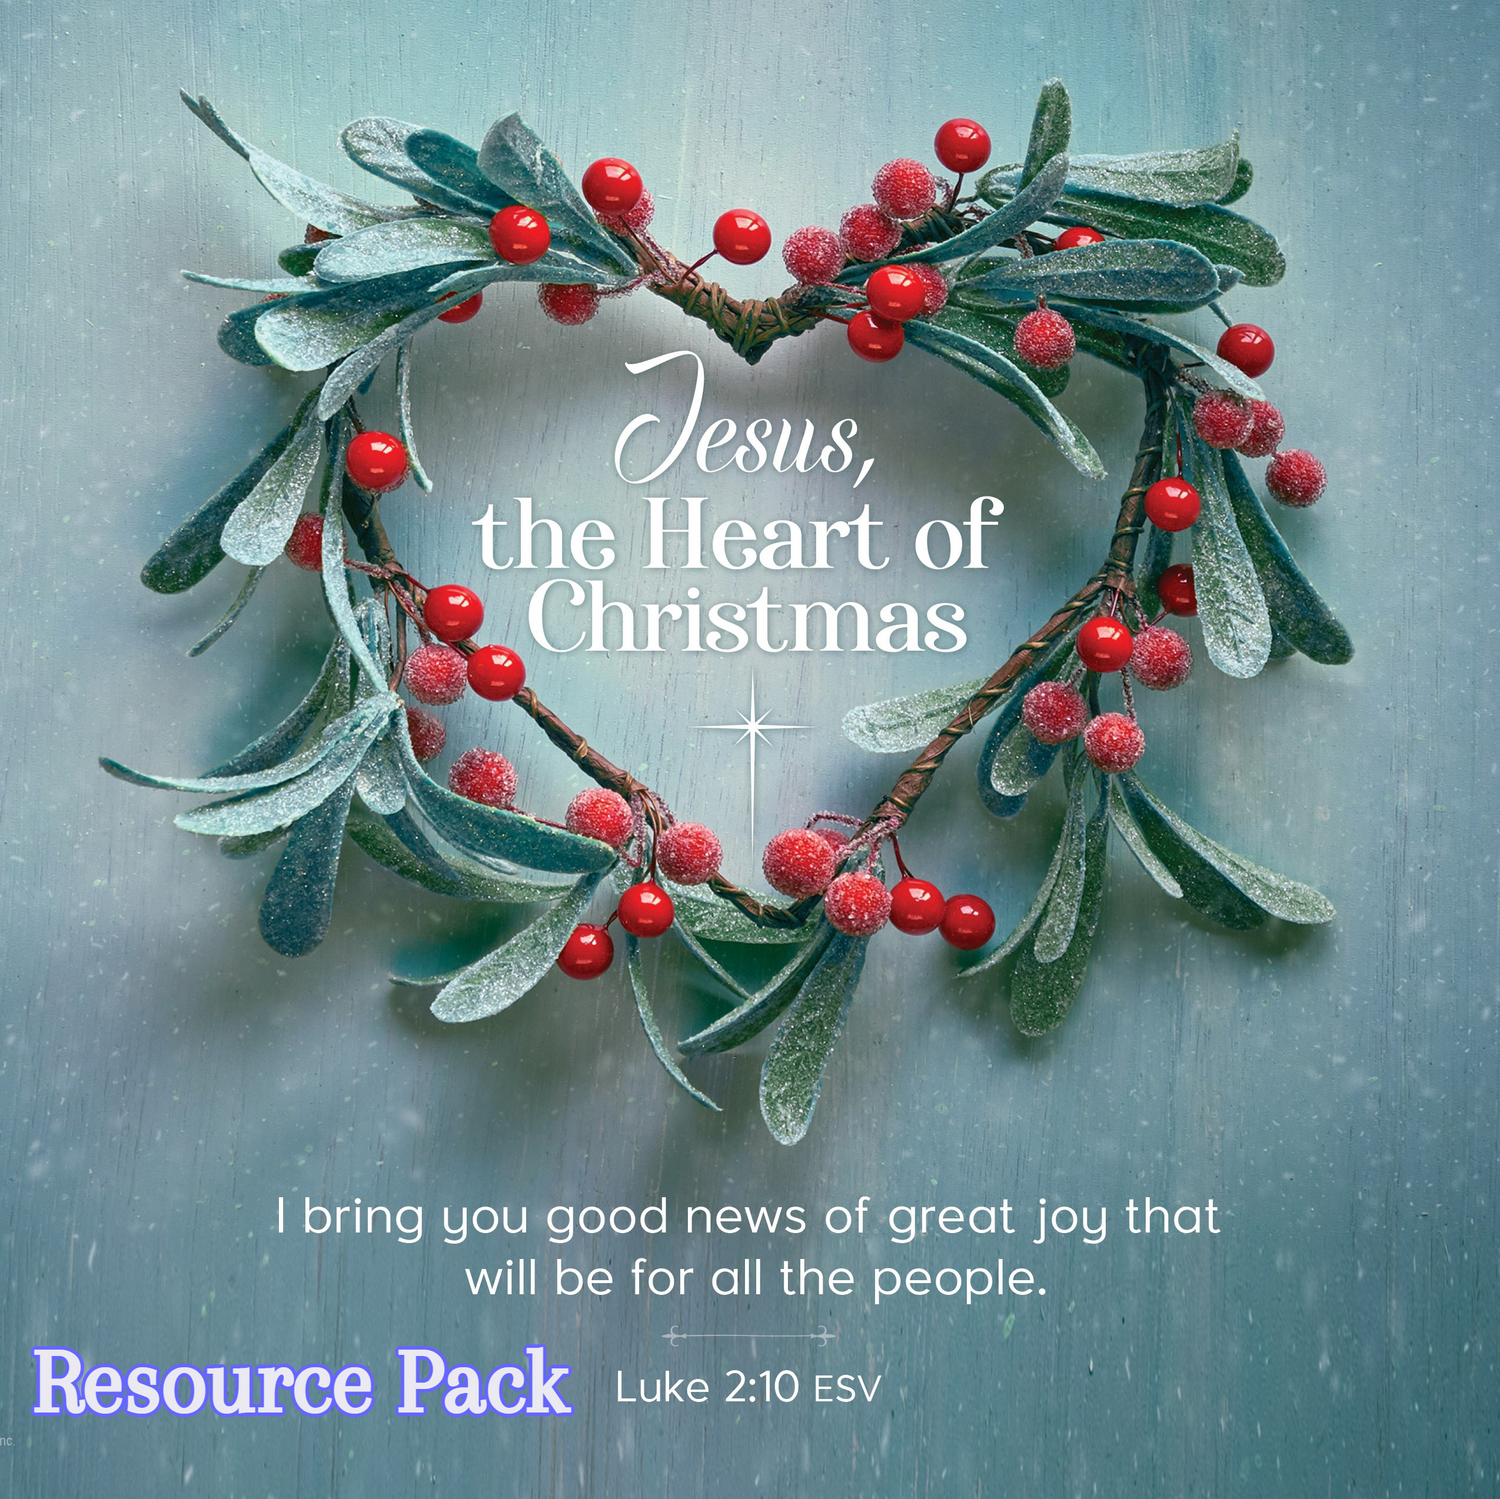 Resource Pack - Jesus, the Heart of Christmas